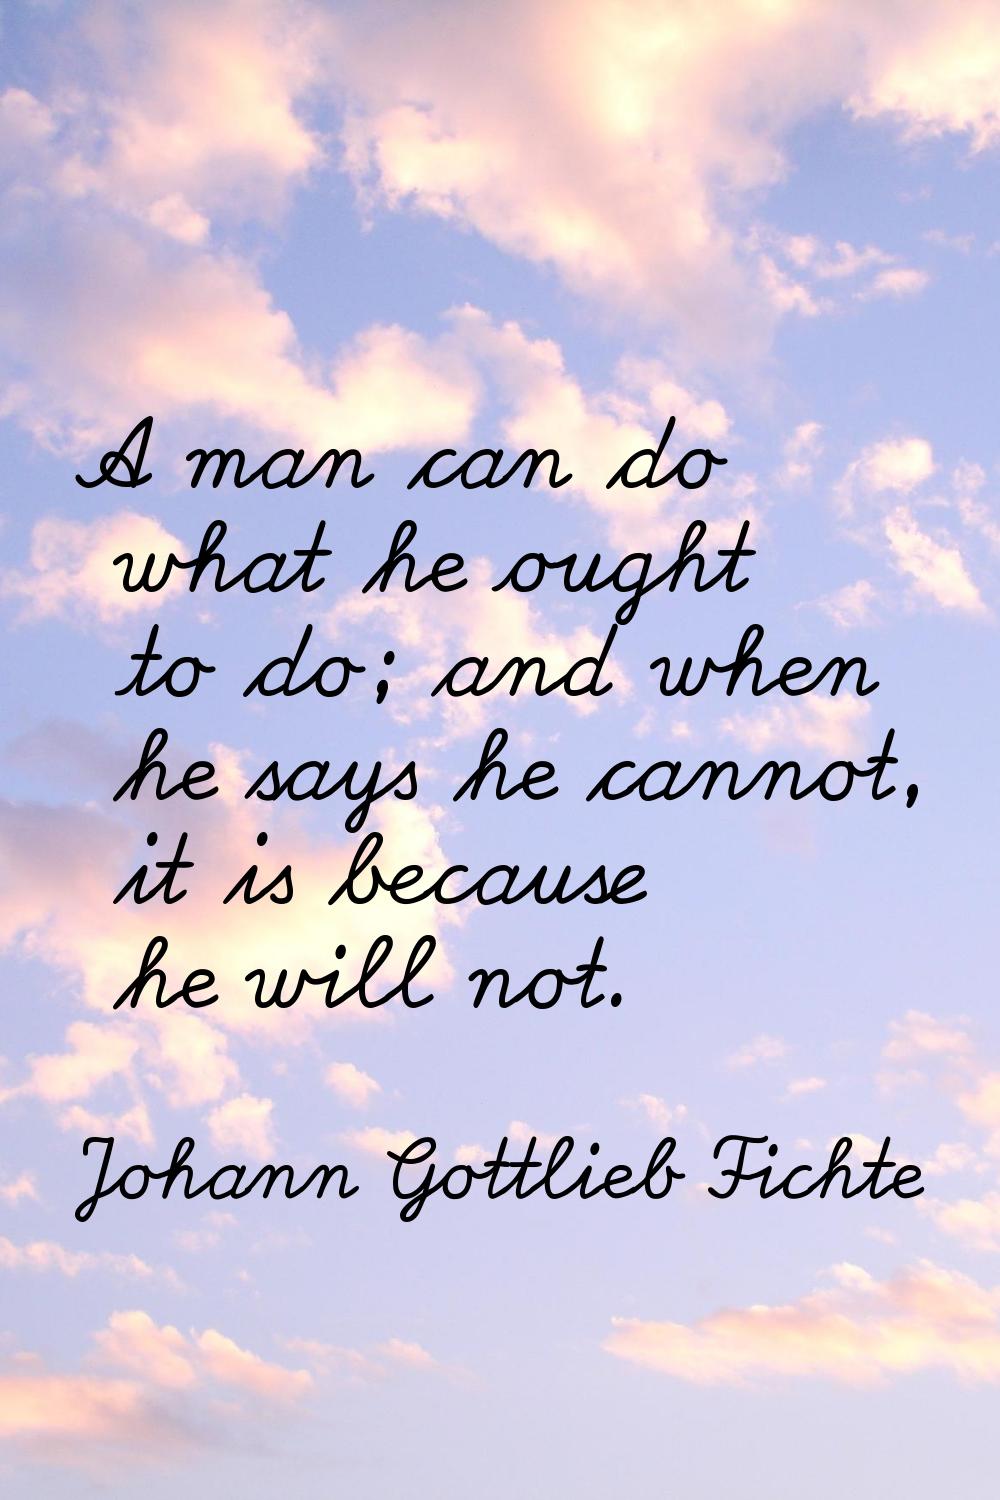 A man can do what he ought to do; and when he says he cannot, it is because he will not.